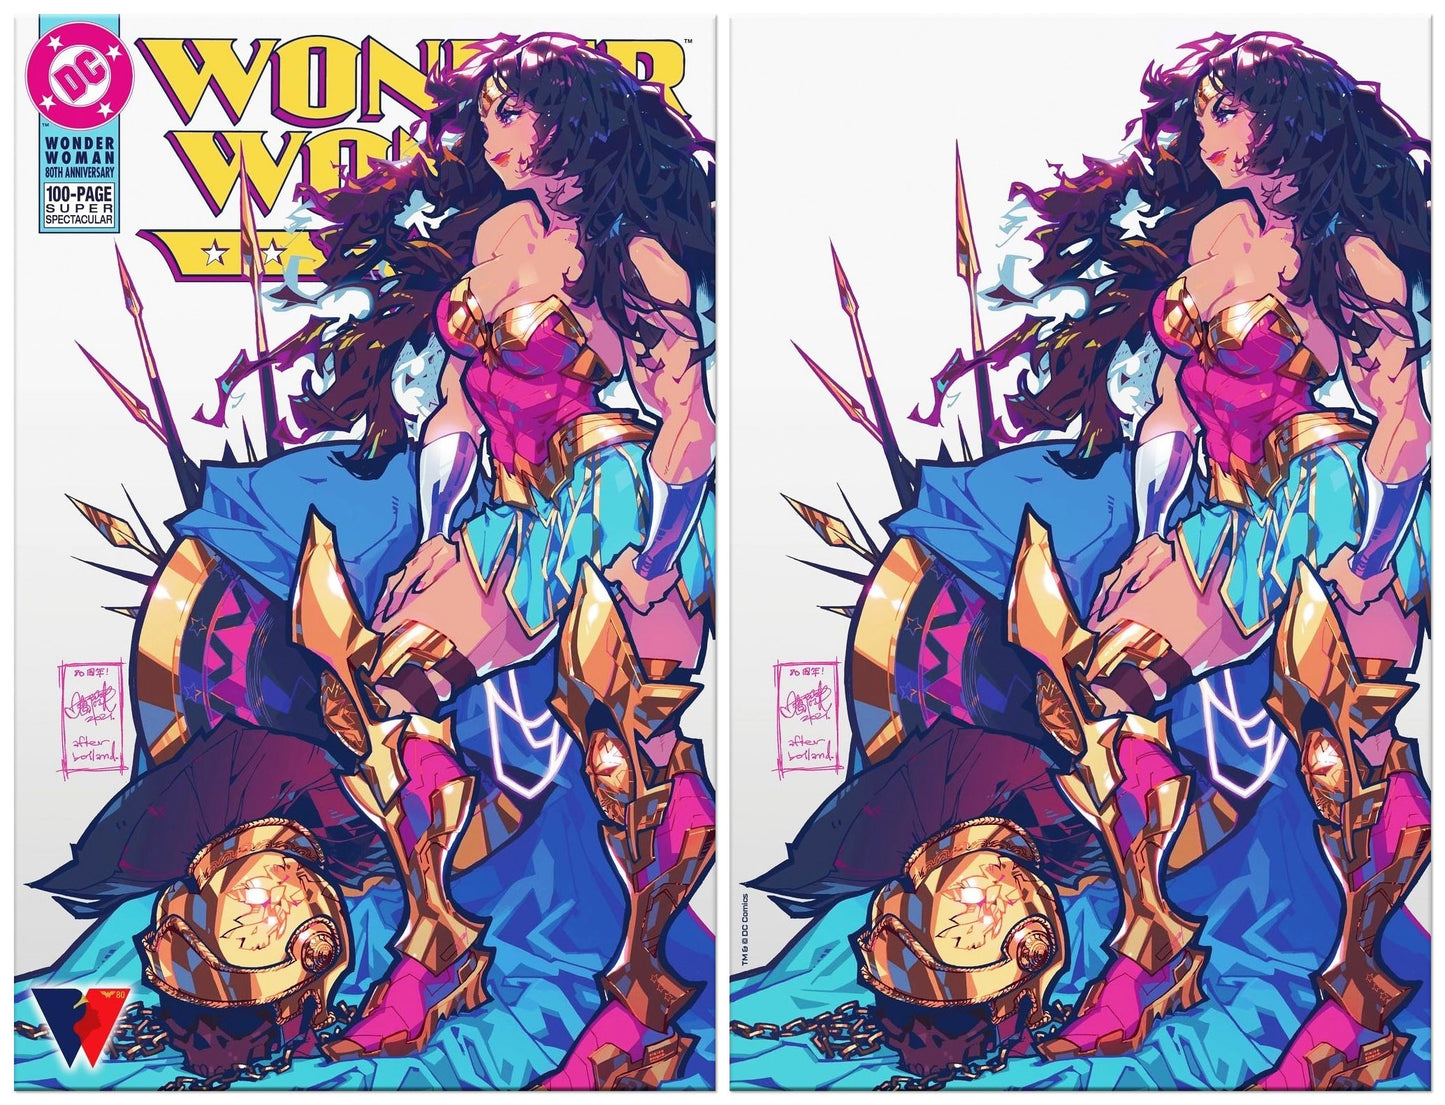 WONDER WOMAN 80TH ANNIVERSARY ROSE BESCH TRADE/NYCC VIRGIN VARIANT SET LIMITED TO 1000 SETS WITH COA